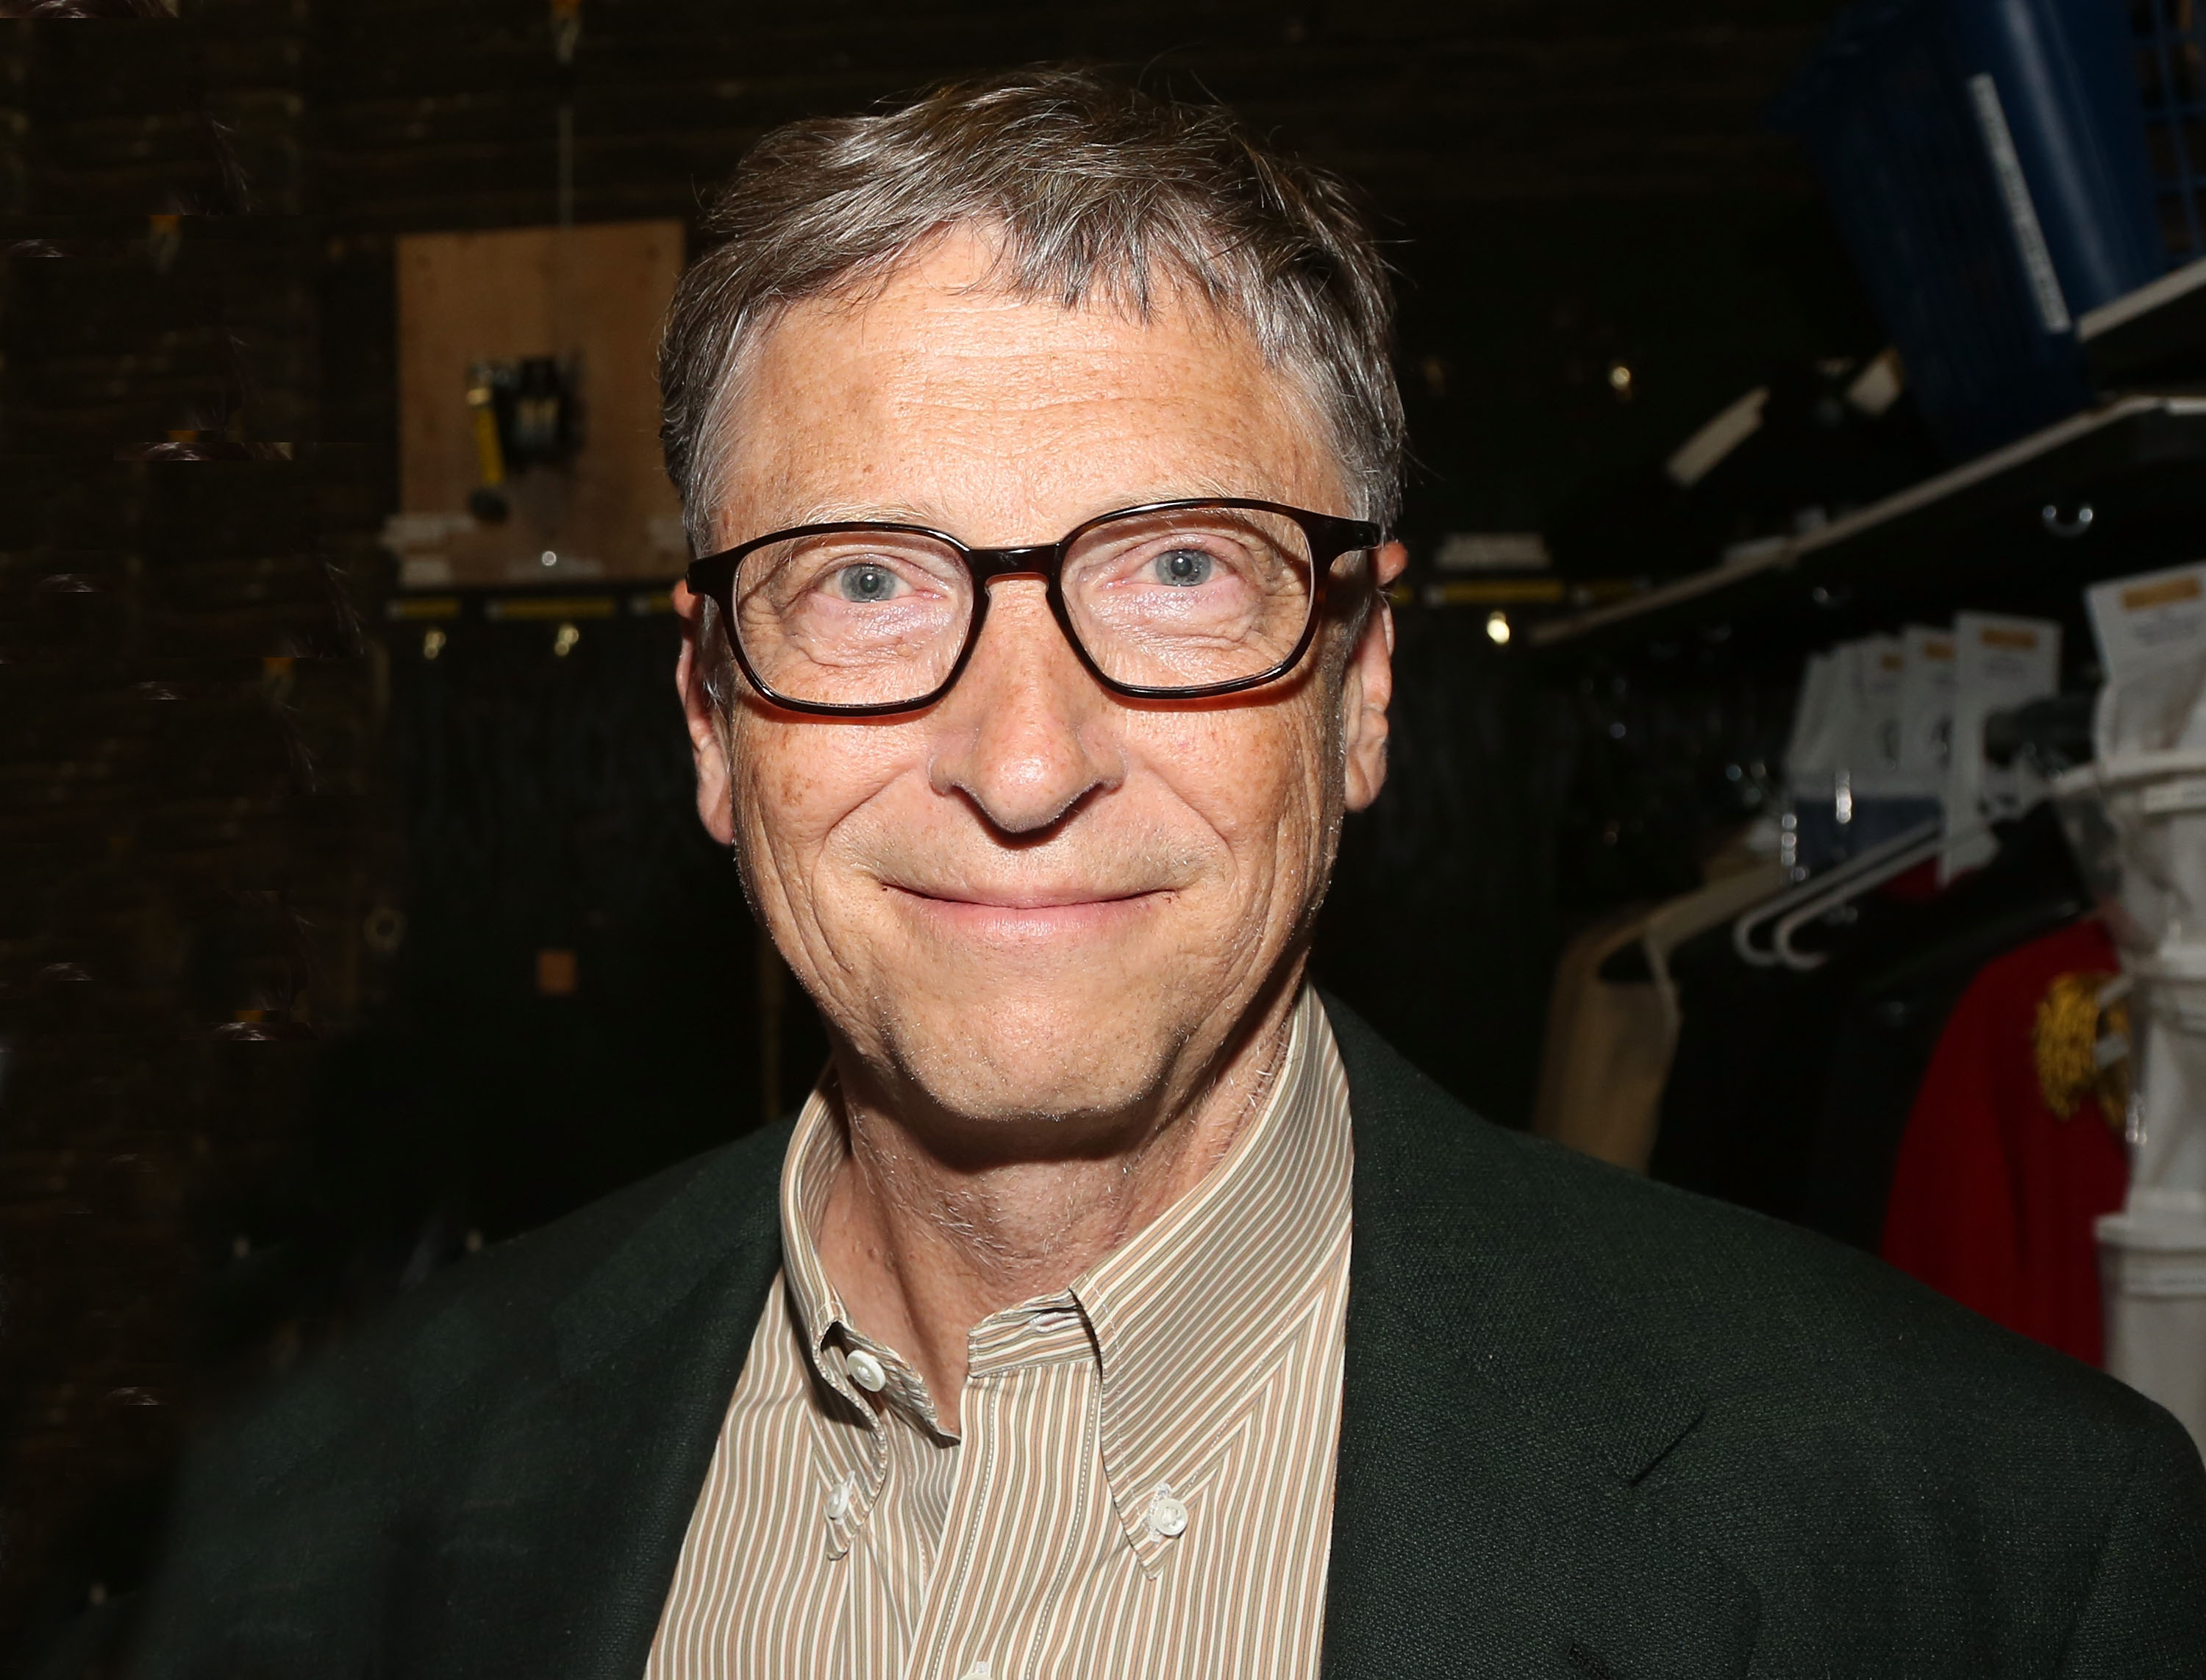 Bill Gates at the backtage of the musical 'Hamilton' on Broadway in New York City on Oct. 11, 2015.